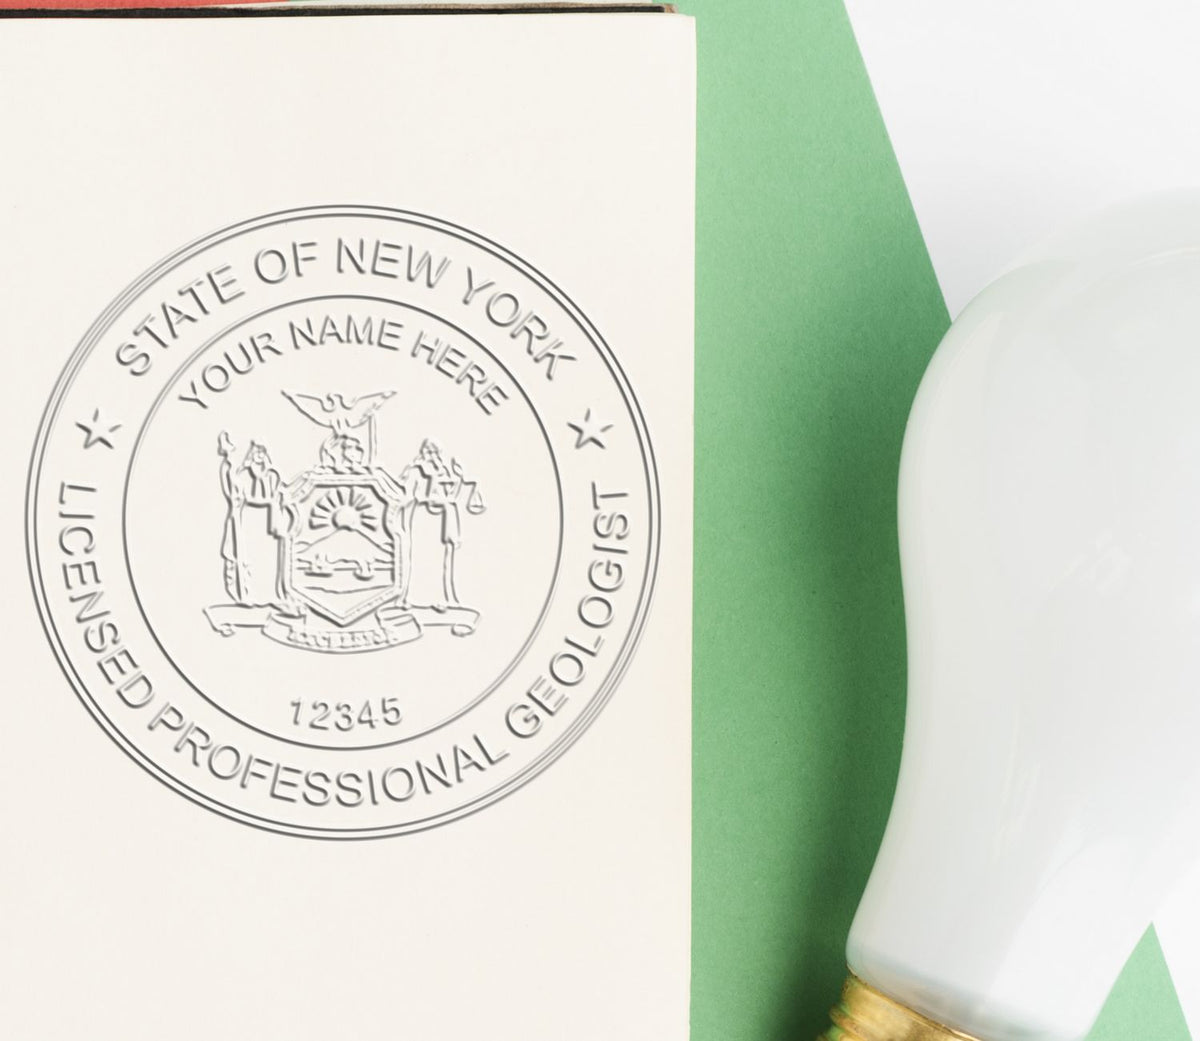 An in use photo of the Long Reach New York Geology Seal showing a sample imprint on a cardstock